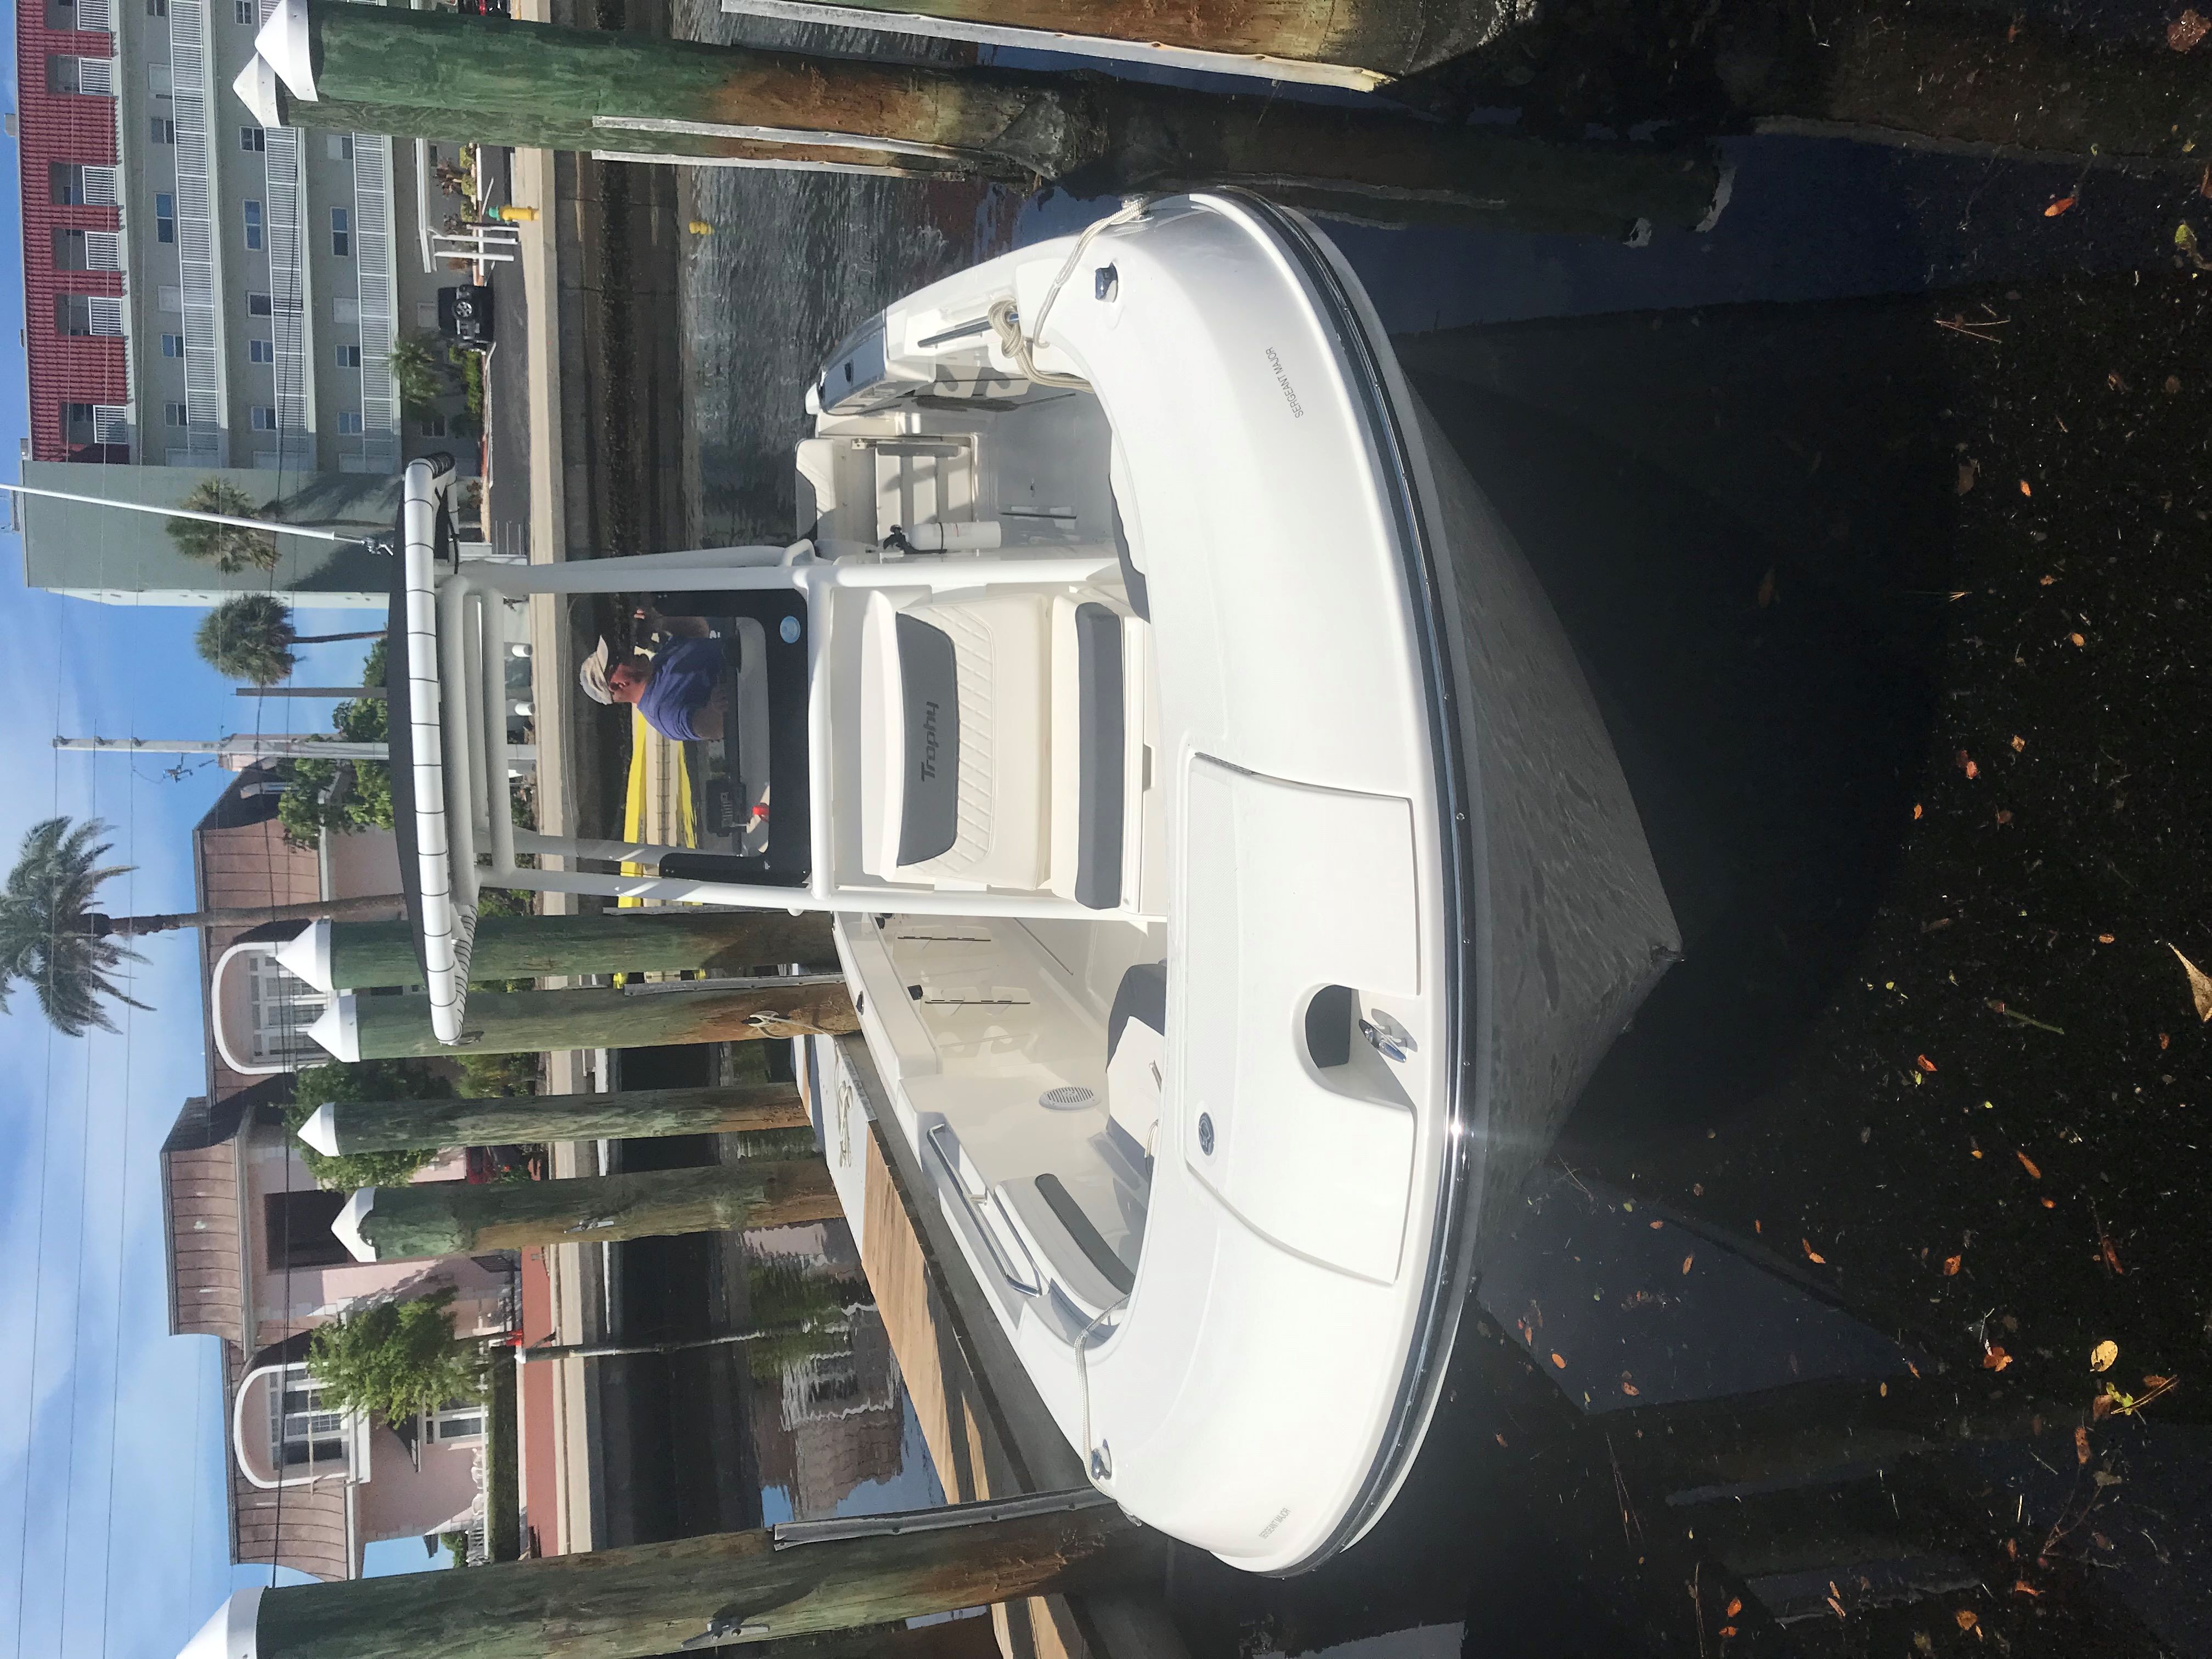 SERGEANT MAJOR (24FT Bayliner Trophy Offshore  Ctr Console - 250 HP~Fish)